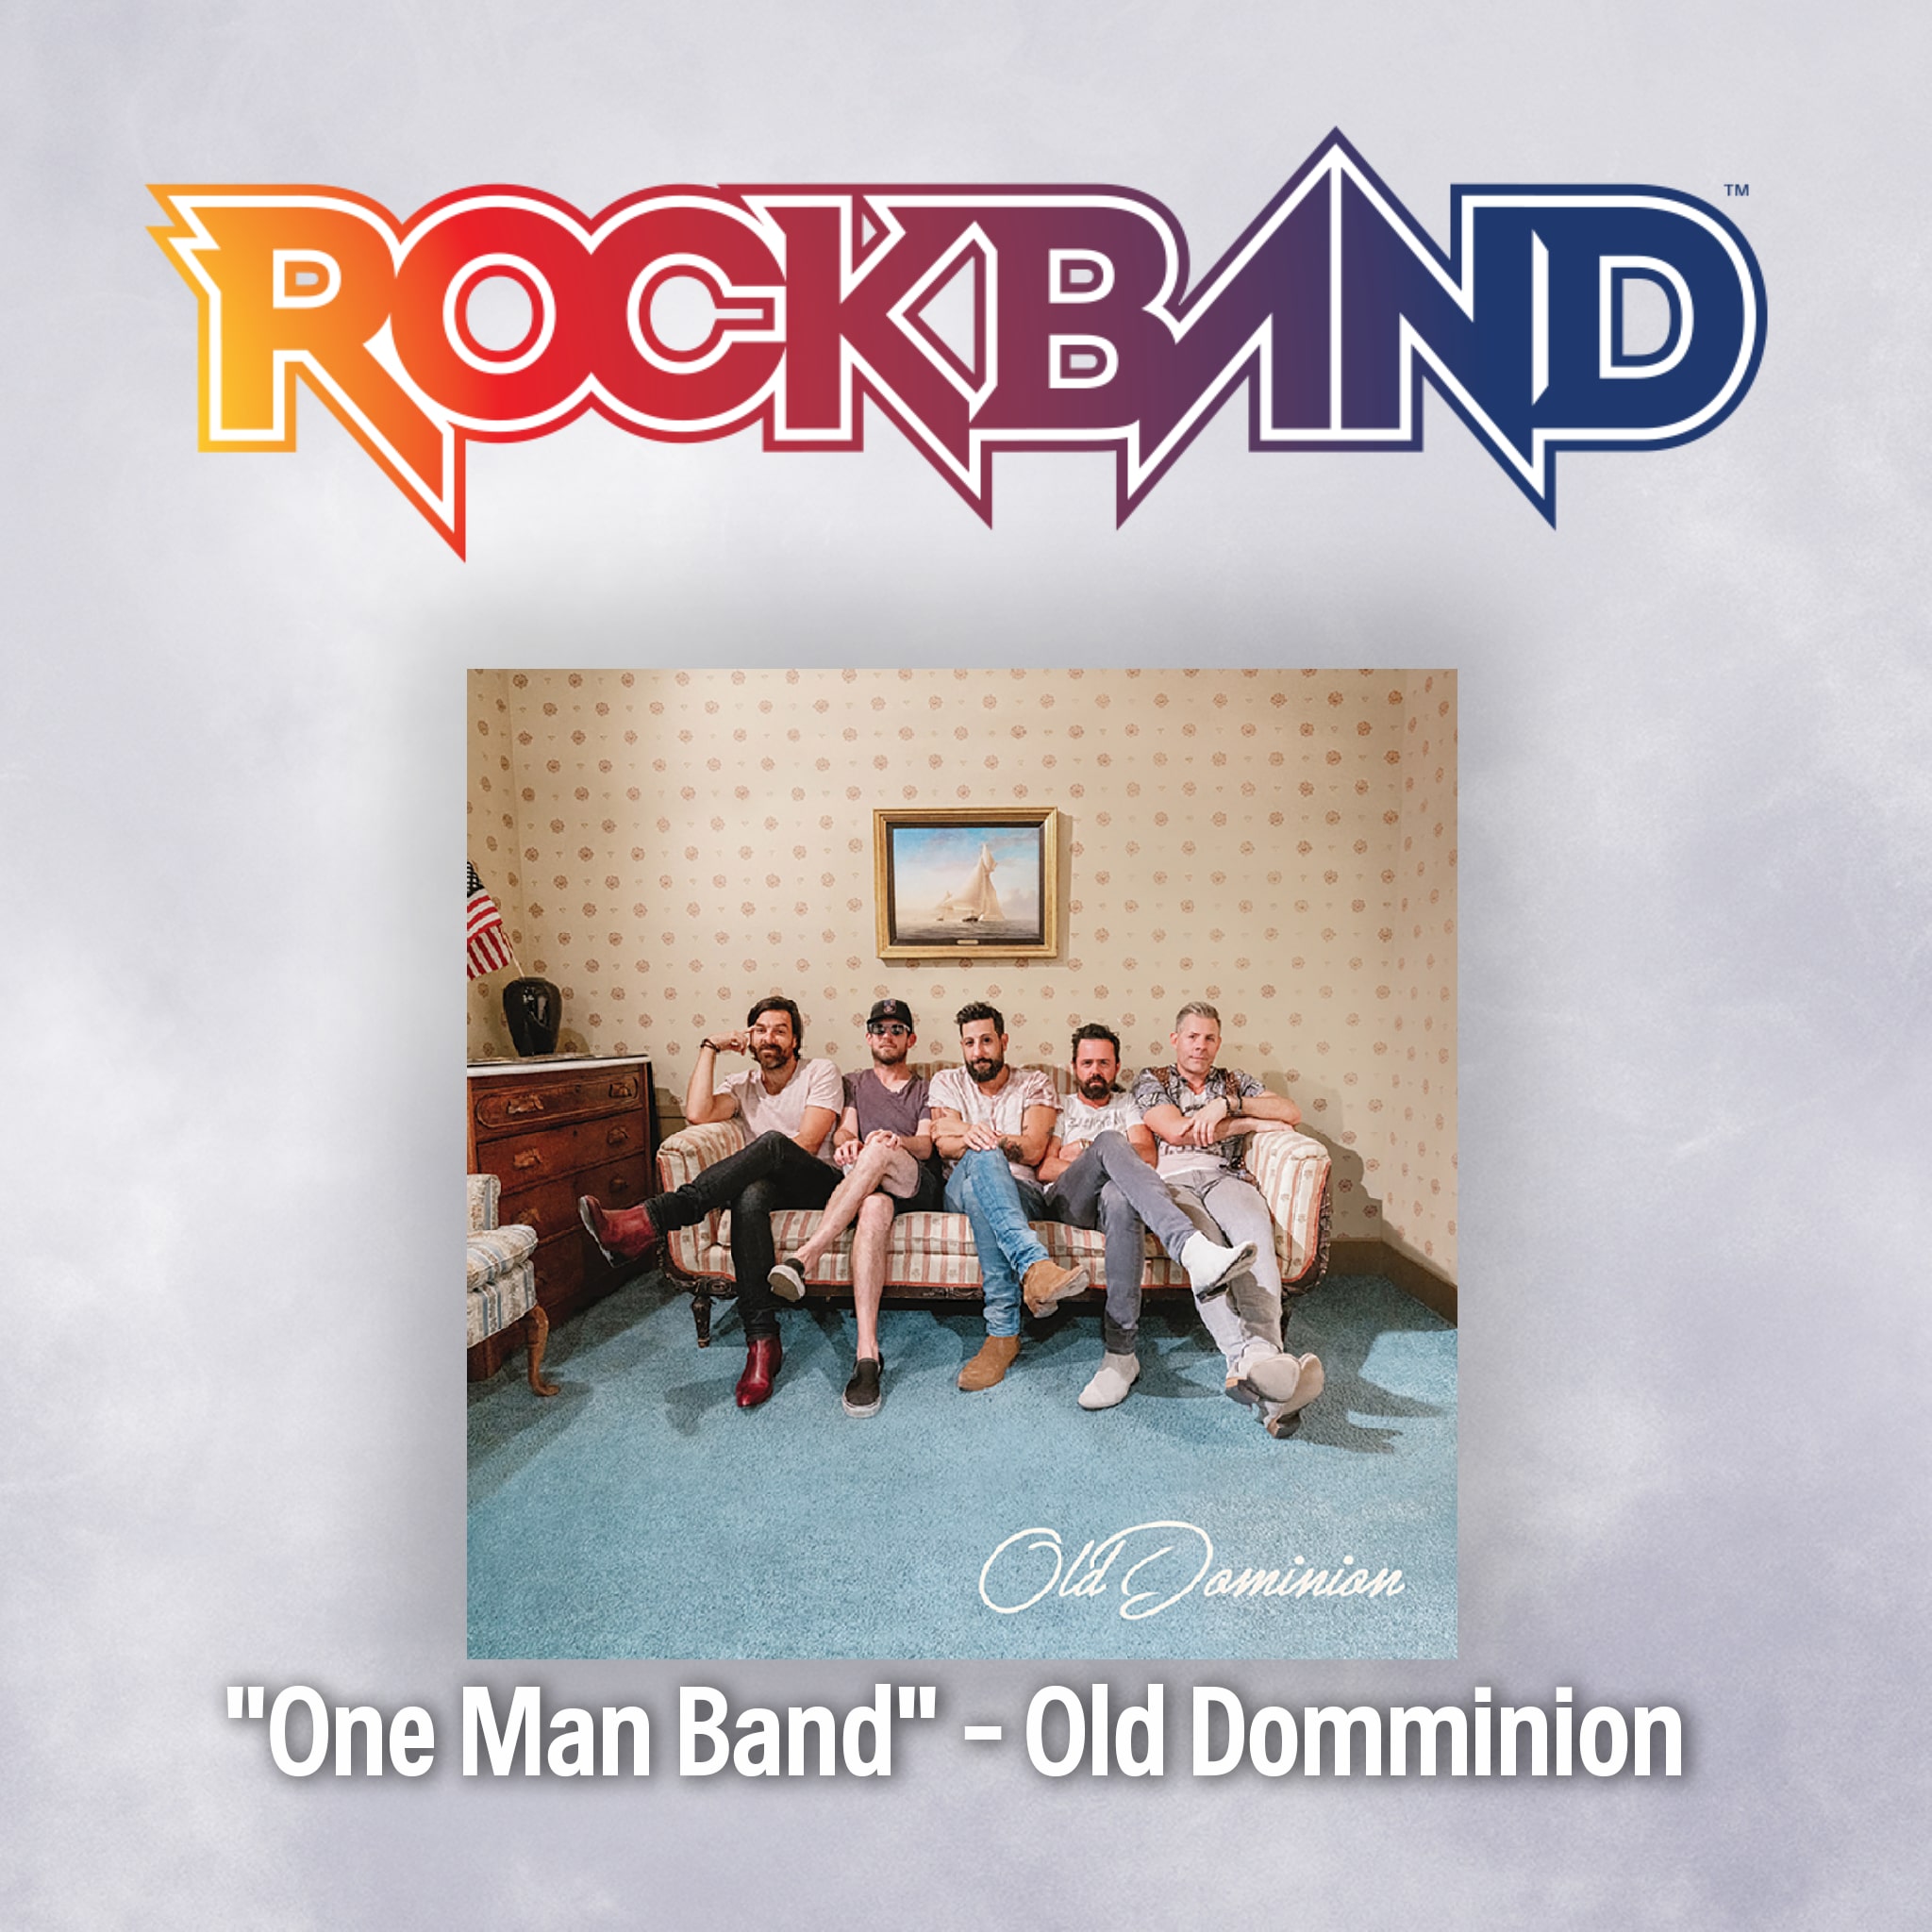 'One Man Band' - Old Dominion